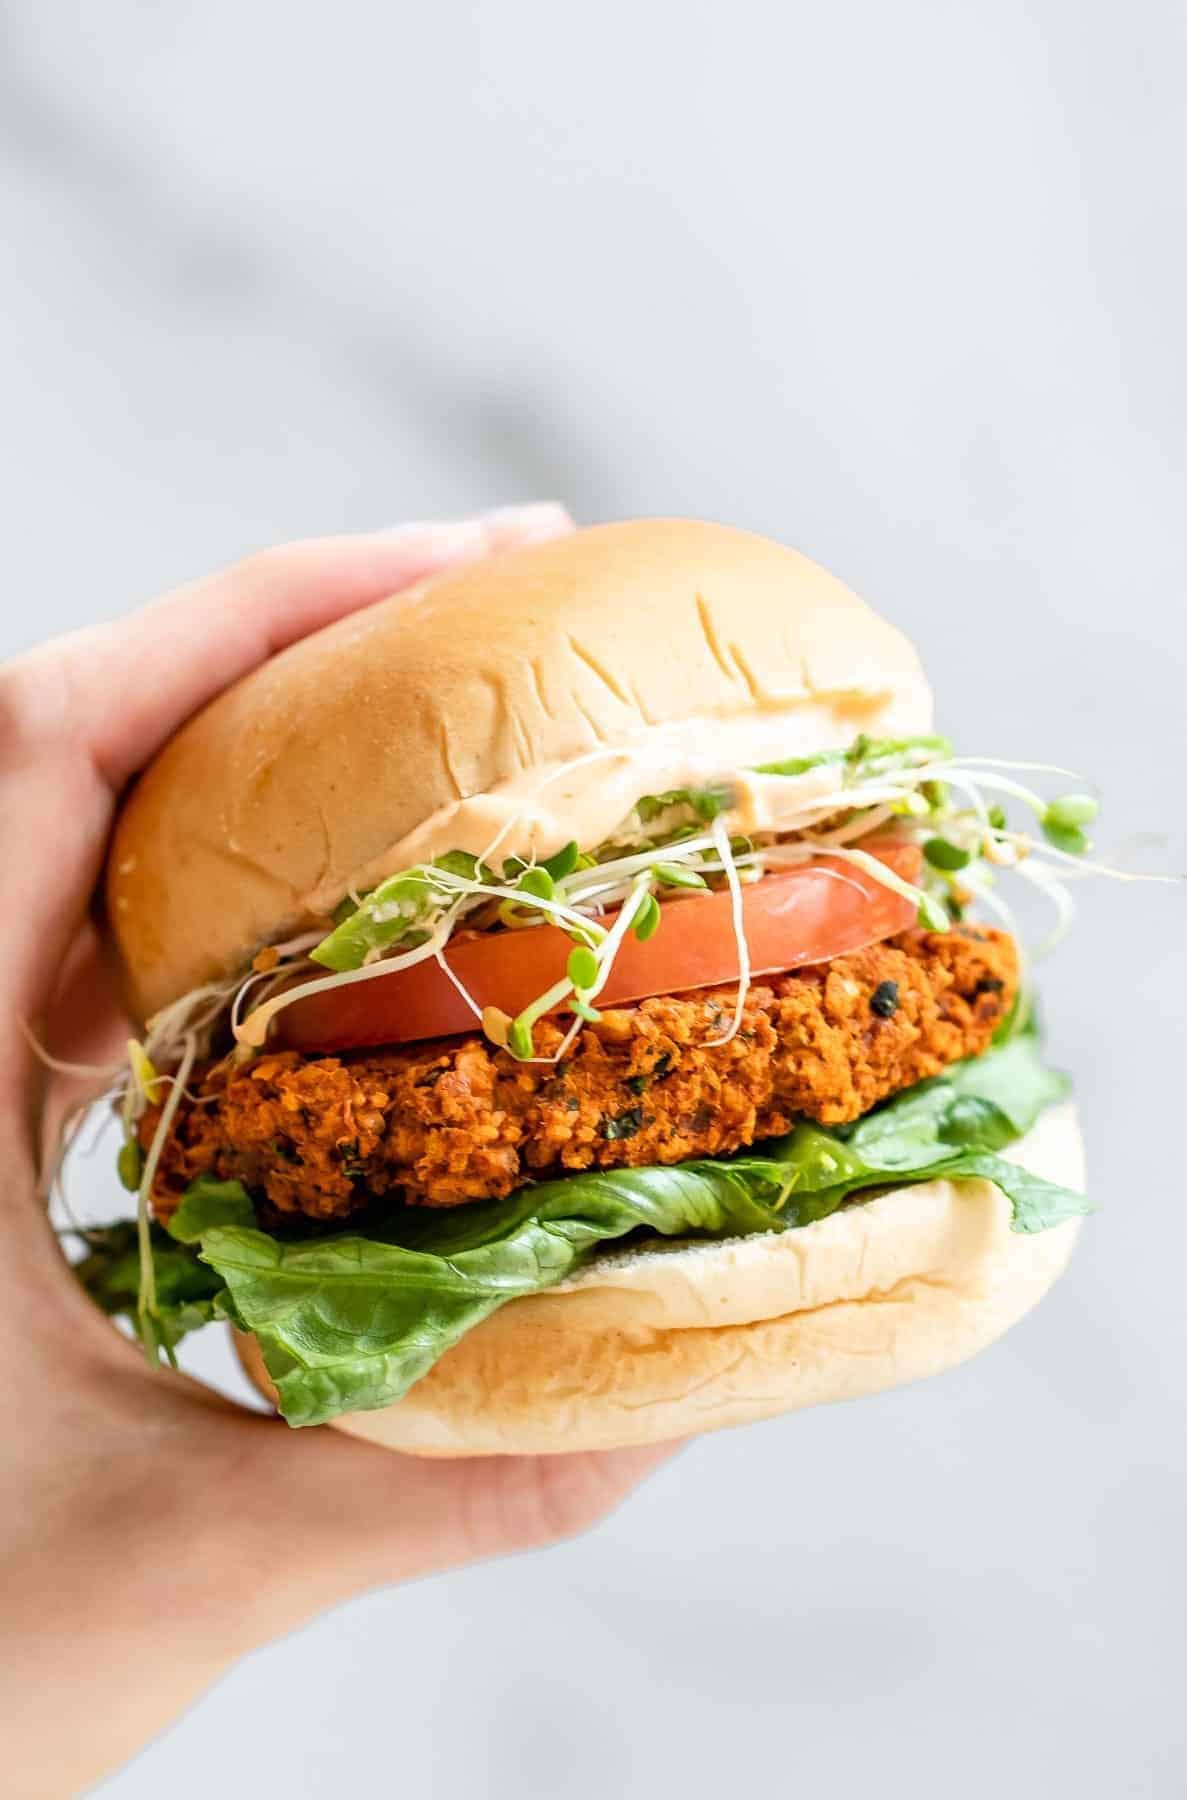 Hand holding up a chickpea burger with lettuce and tomato.